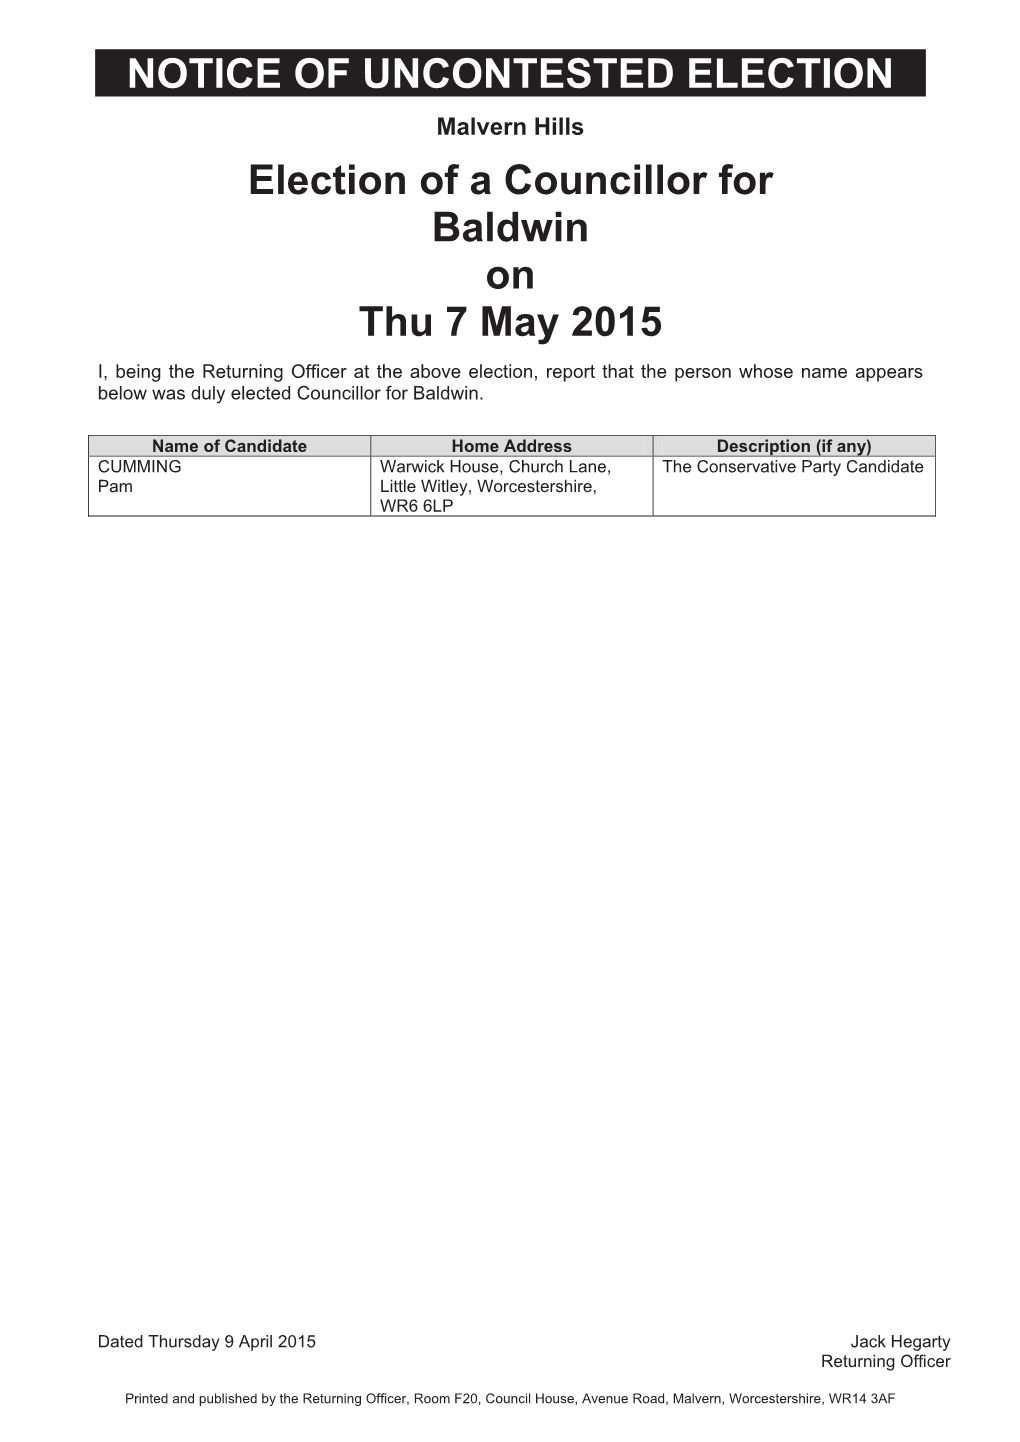 NOTICE of UNCONTESTED ELECTION Election of a Councillor